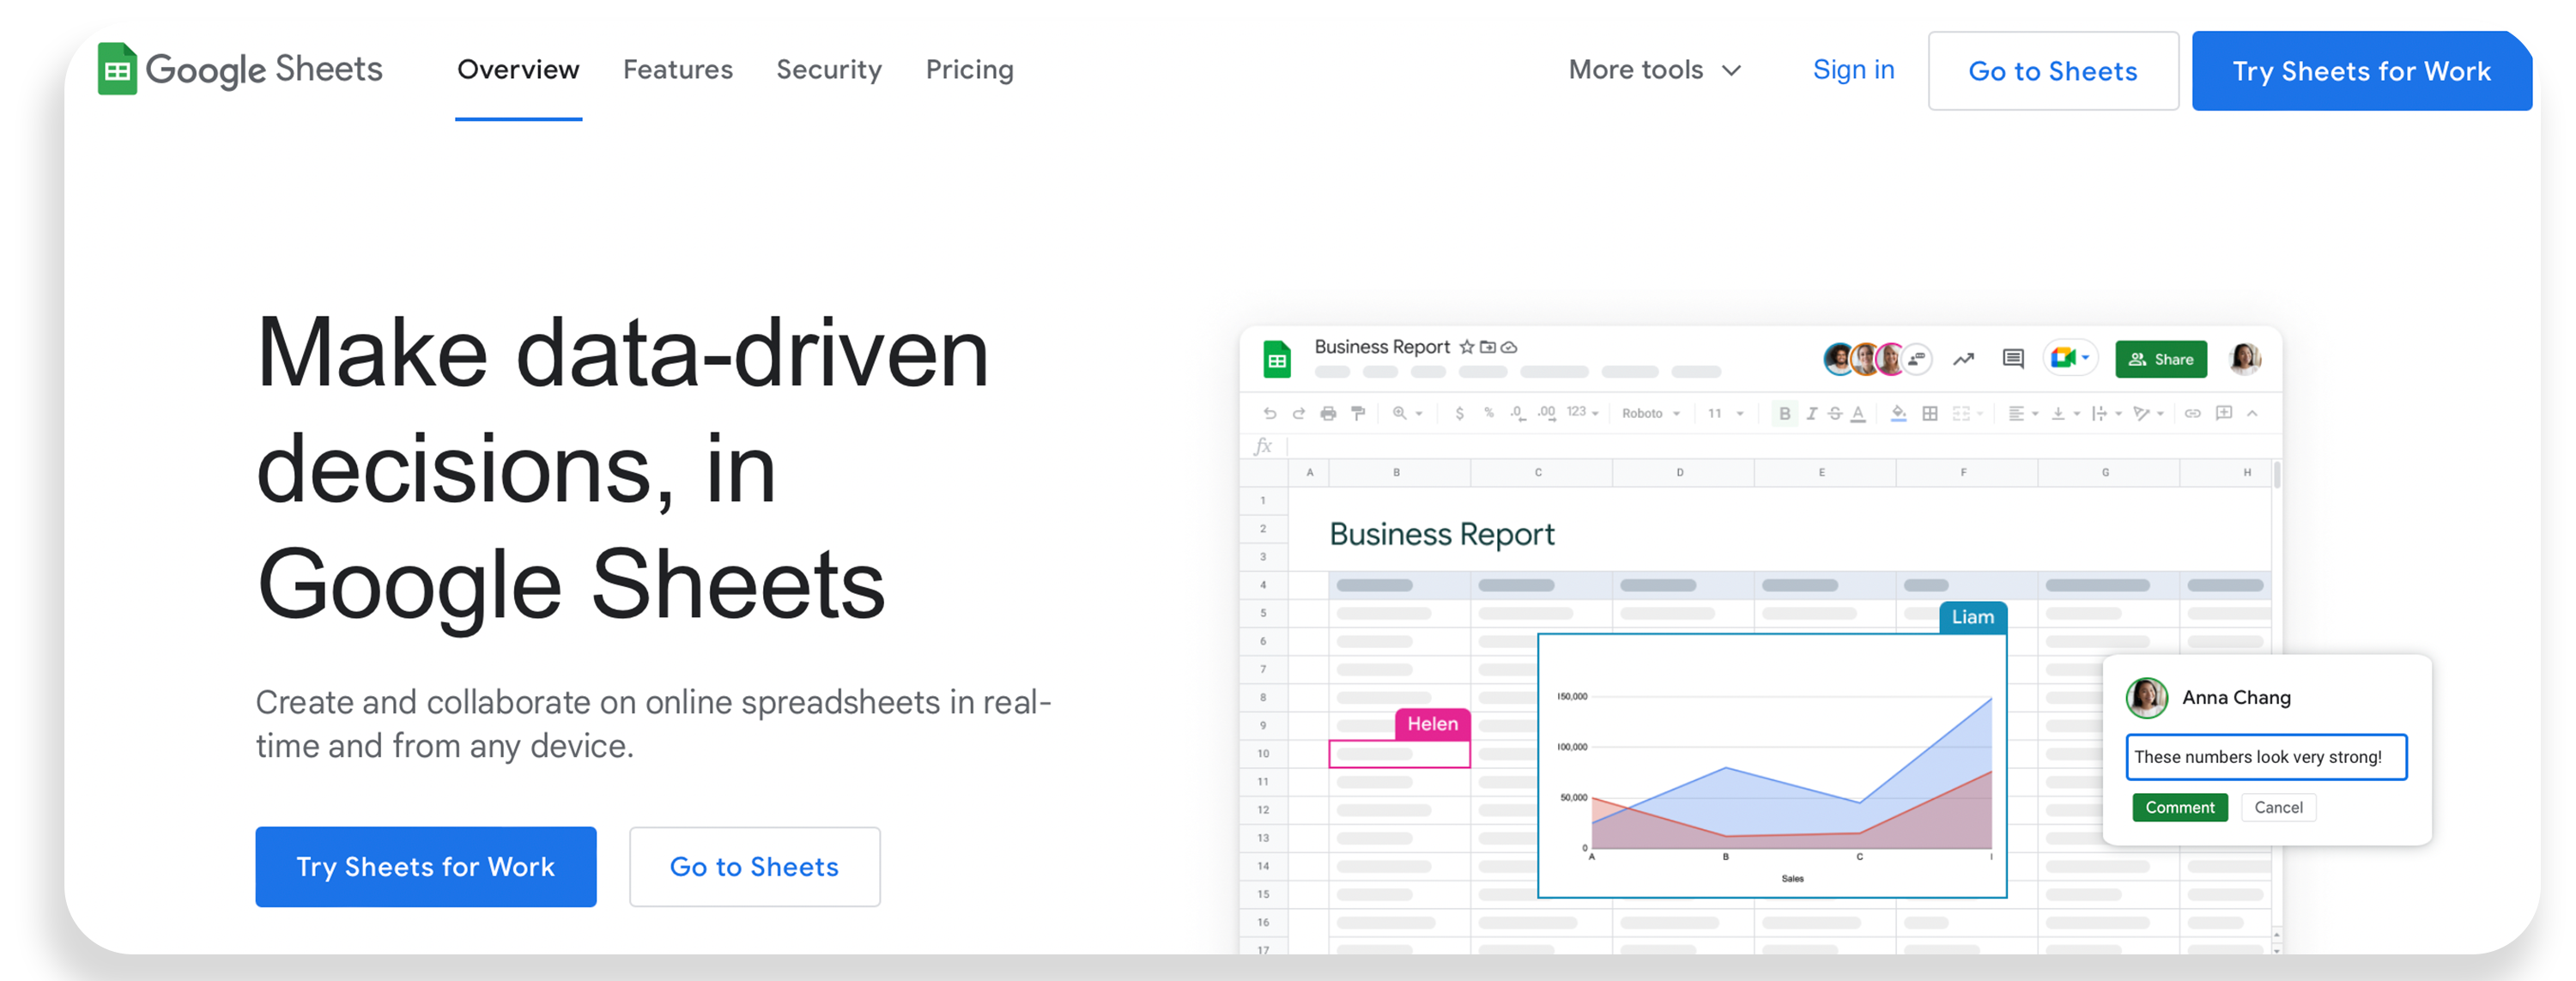 Google Sheets - Small Business Budgeting Software